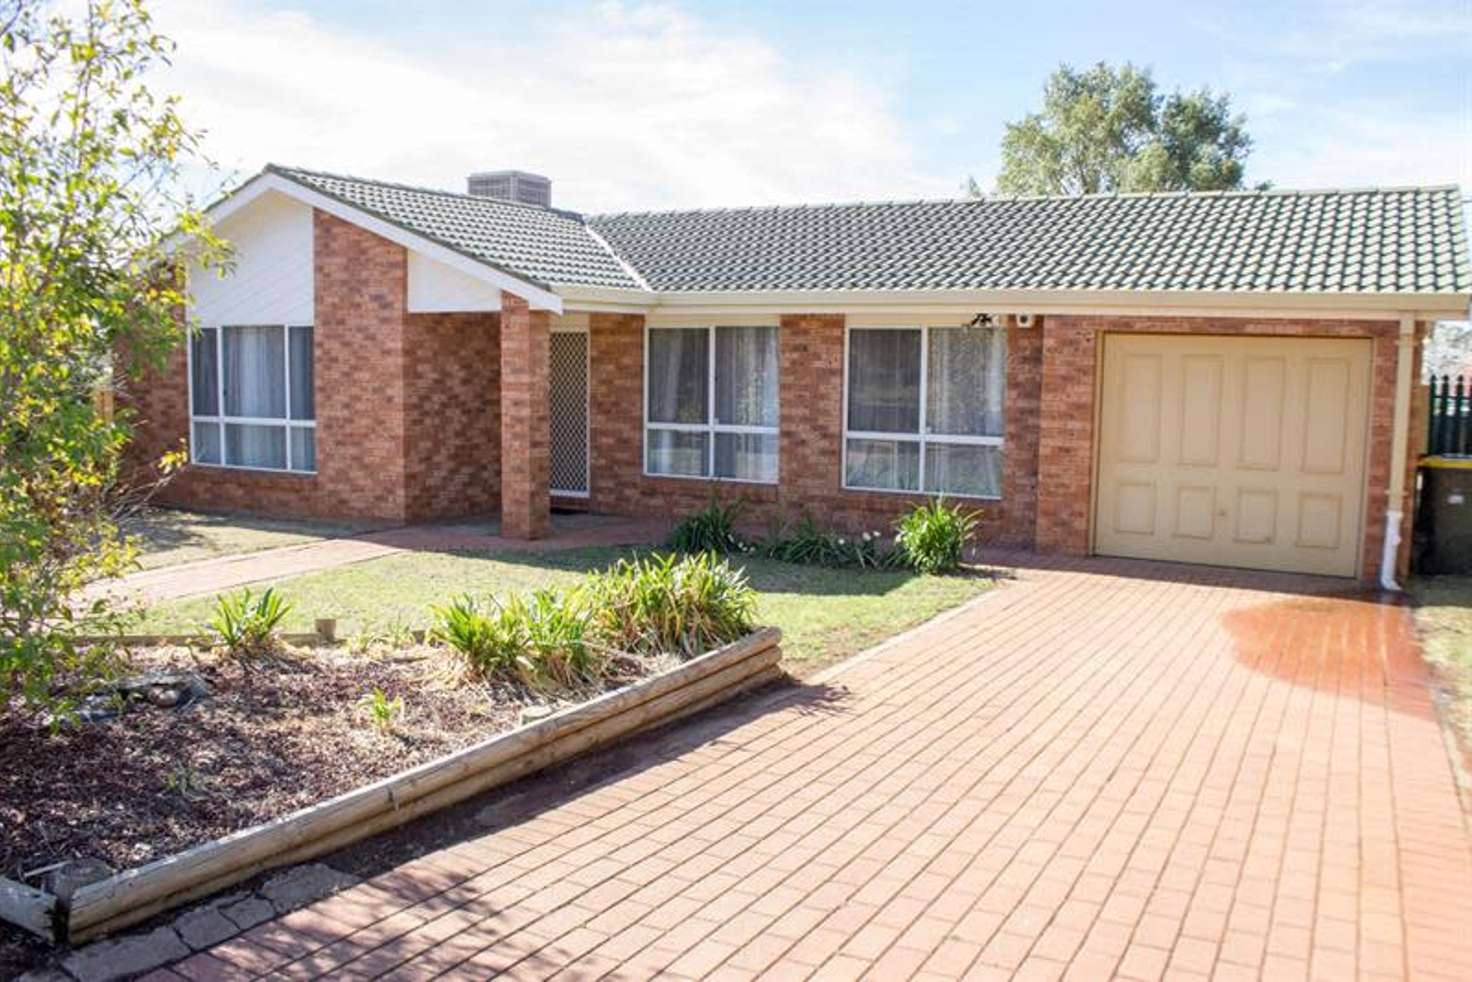 Main view of Homely house listing, 20 Jack William Dr, Dubbo NSW 2830